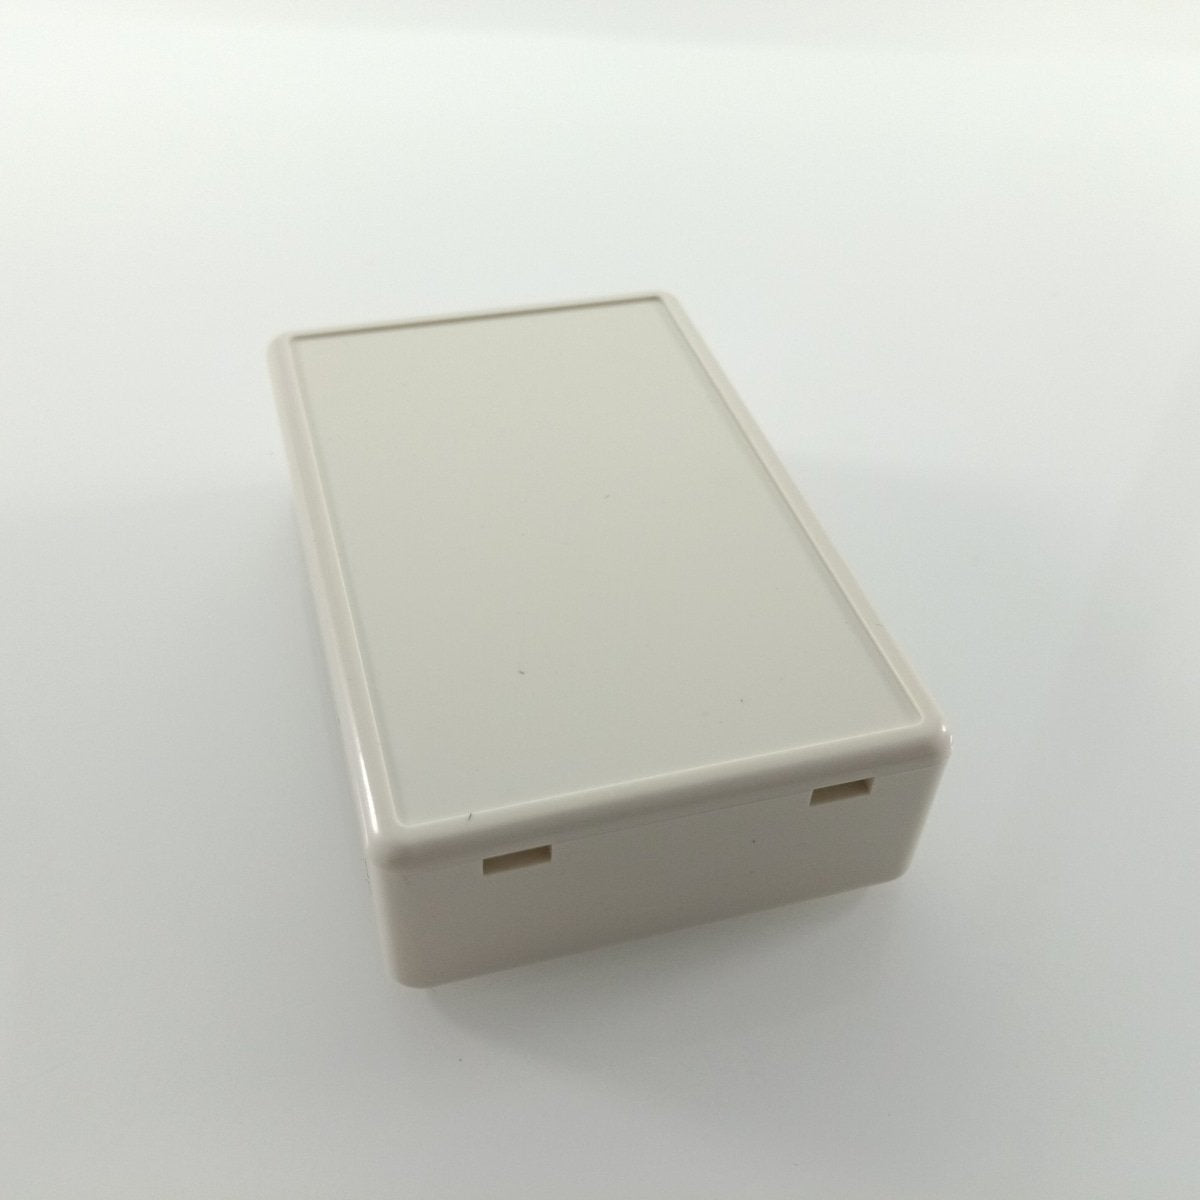 1pcs Electronic Project Case Box Enclosure Junction Box 50/55/70/80/90mm Length - 70x45x18mm - - Asia Sell